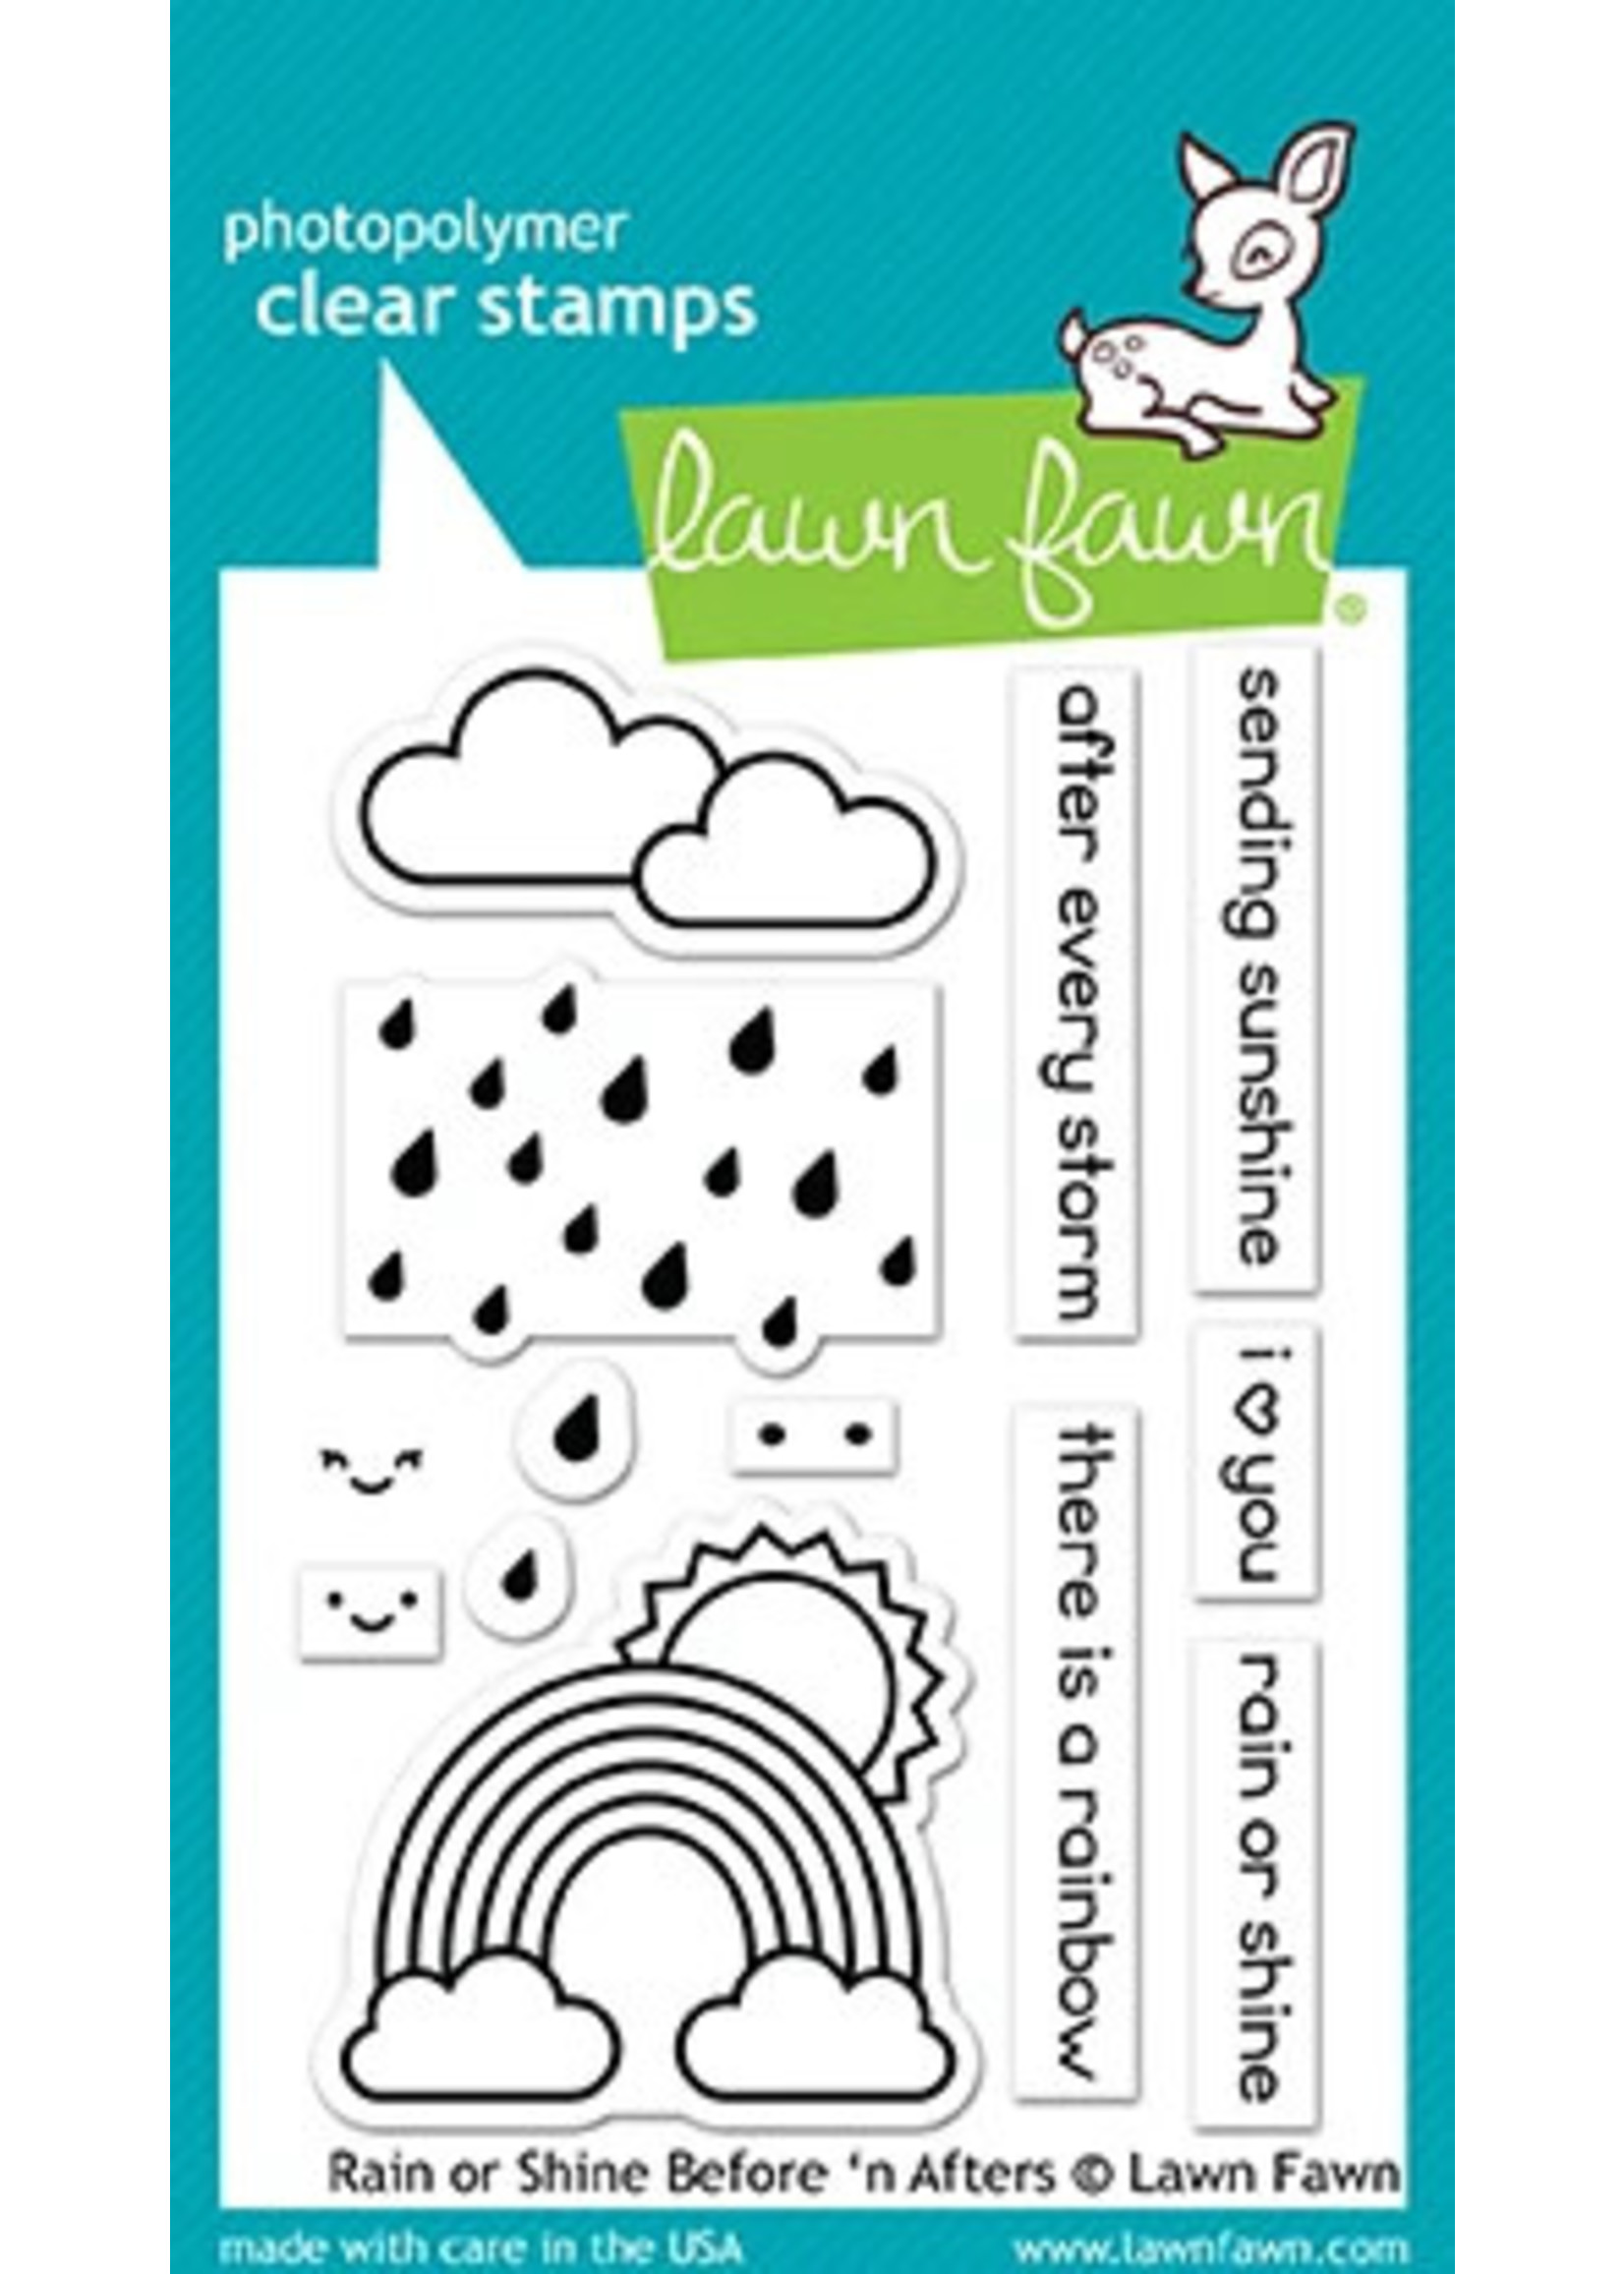 Lawn Fawn Stamp rain or shine before 'n afters